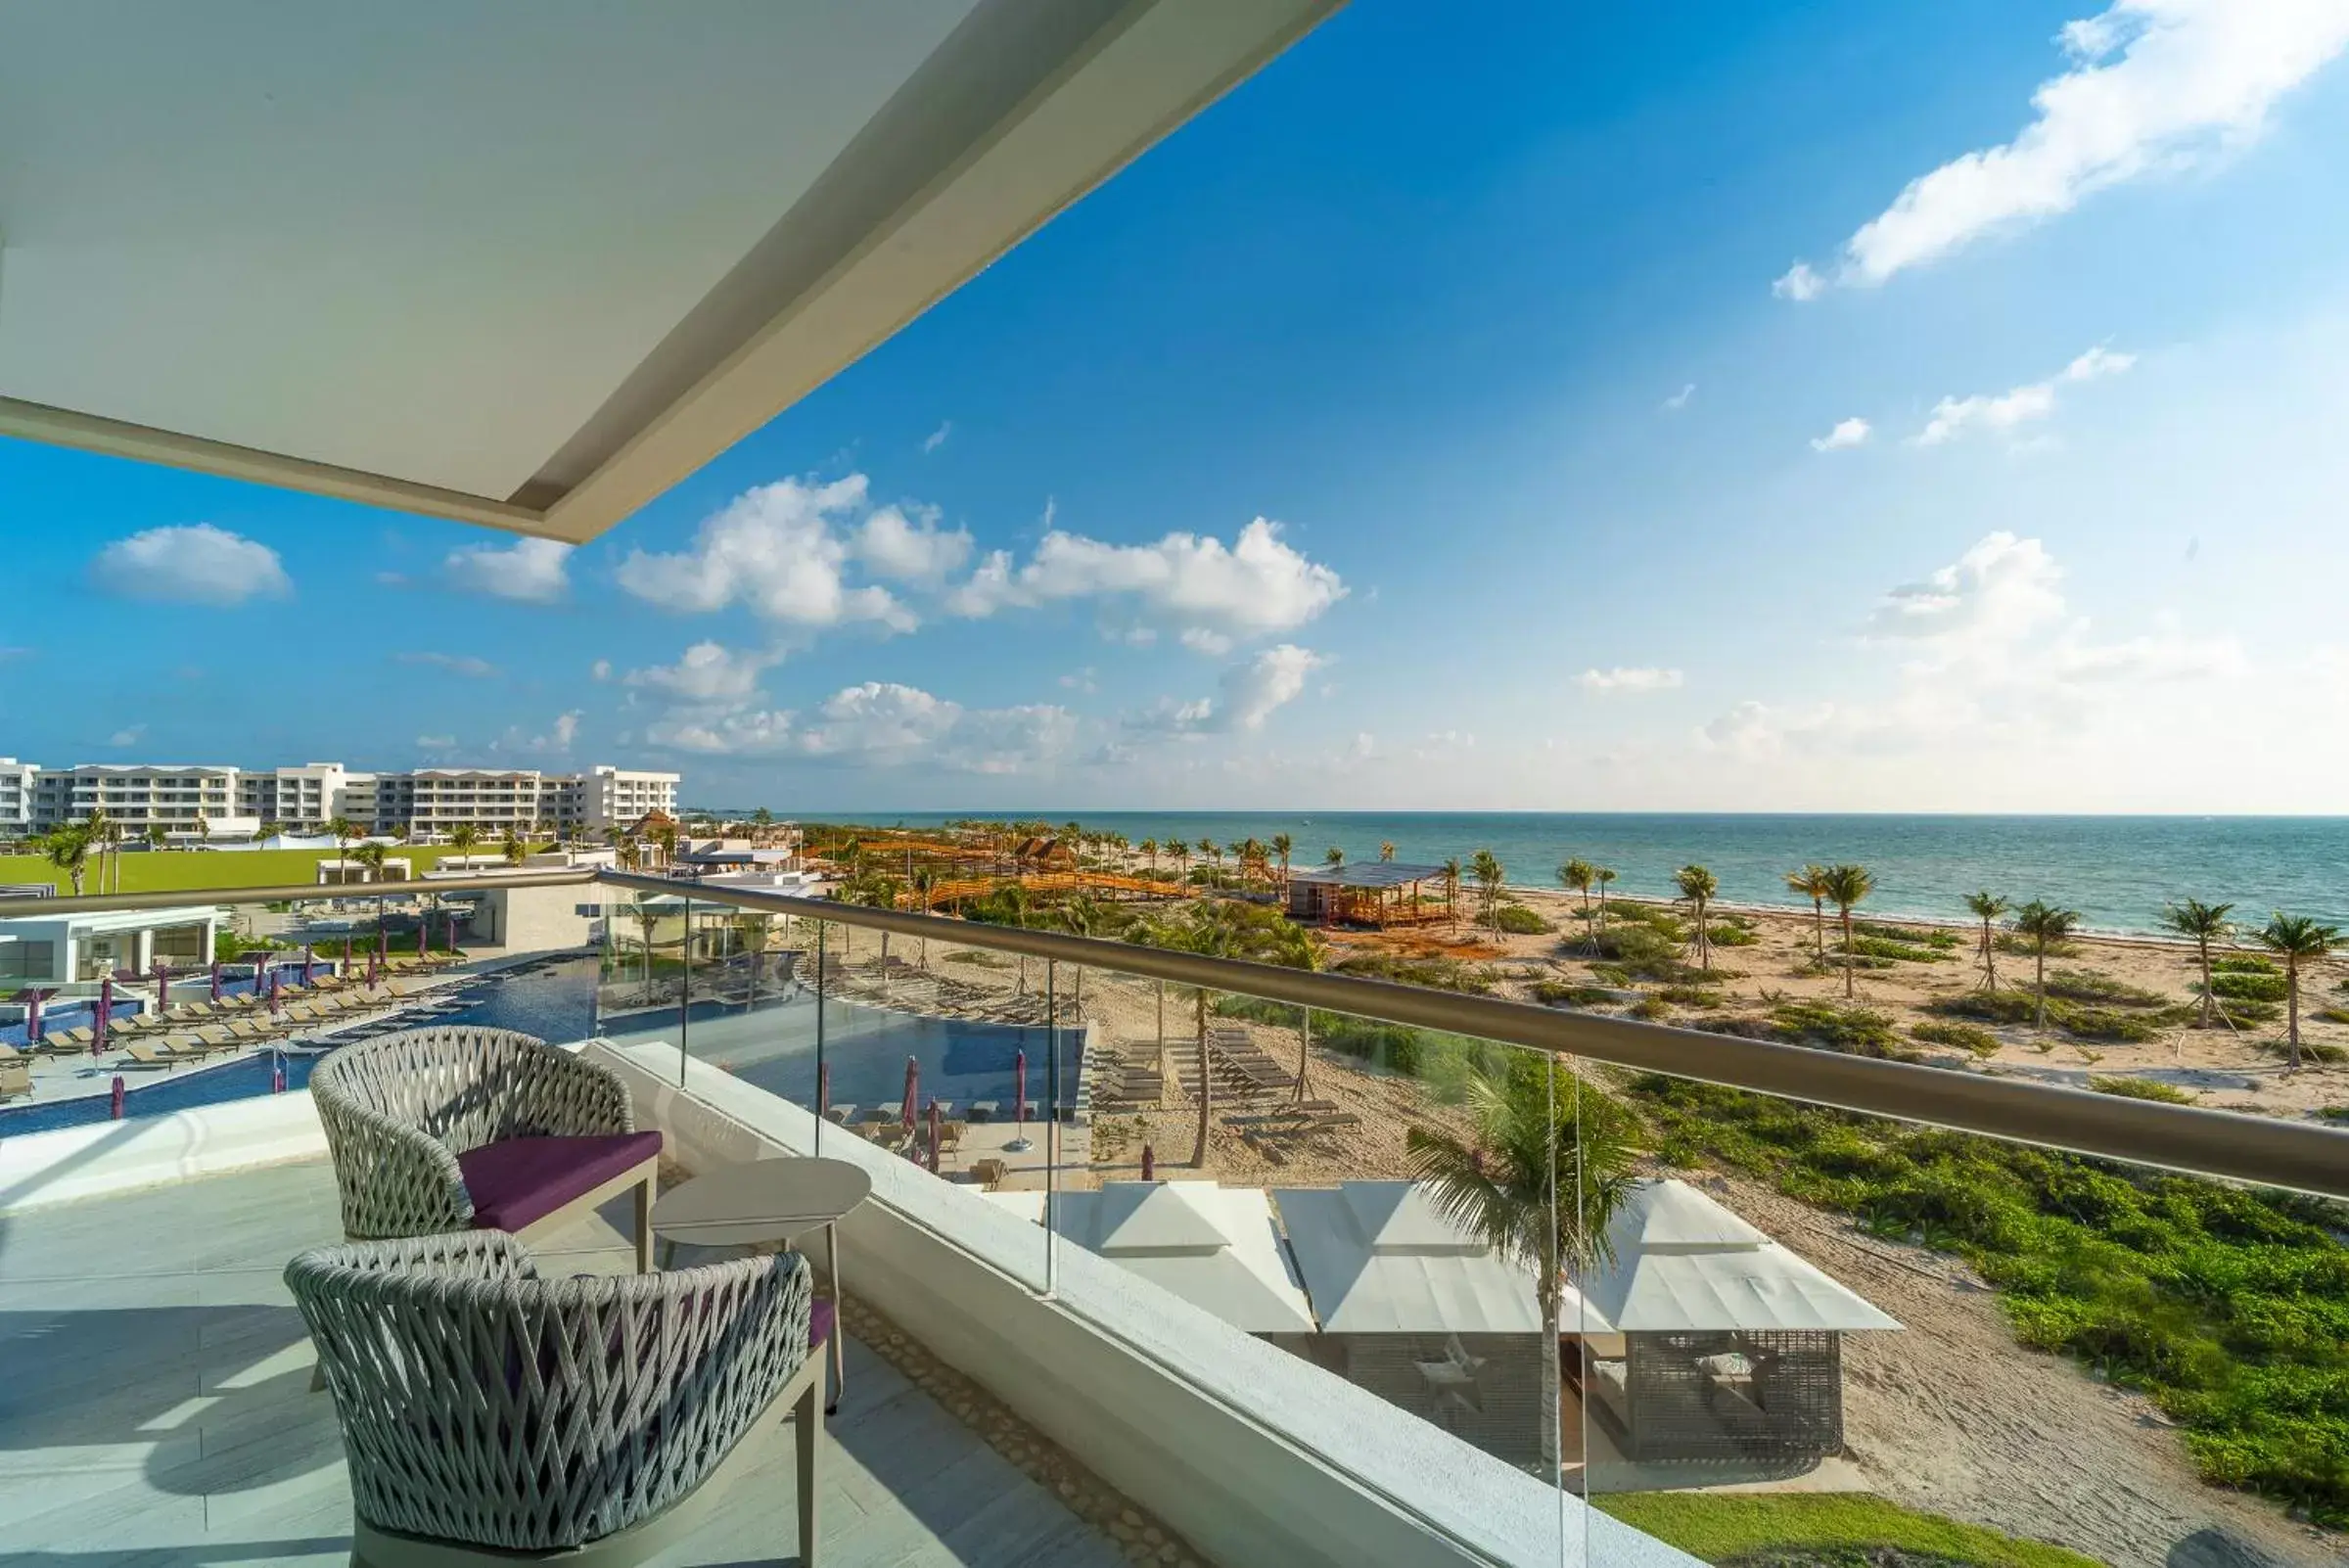 Balcony/Terrace in Planet Hollywood Cancun, An Autograph Collection All-Inclusive Resort